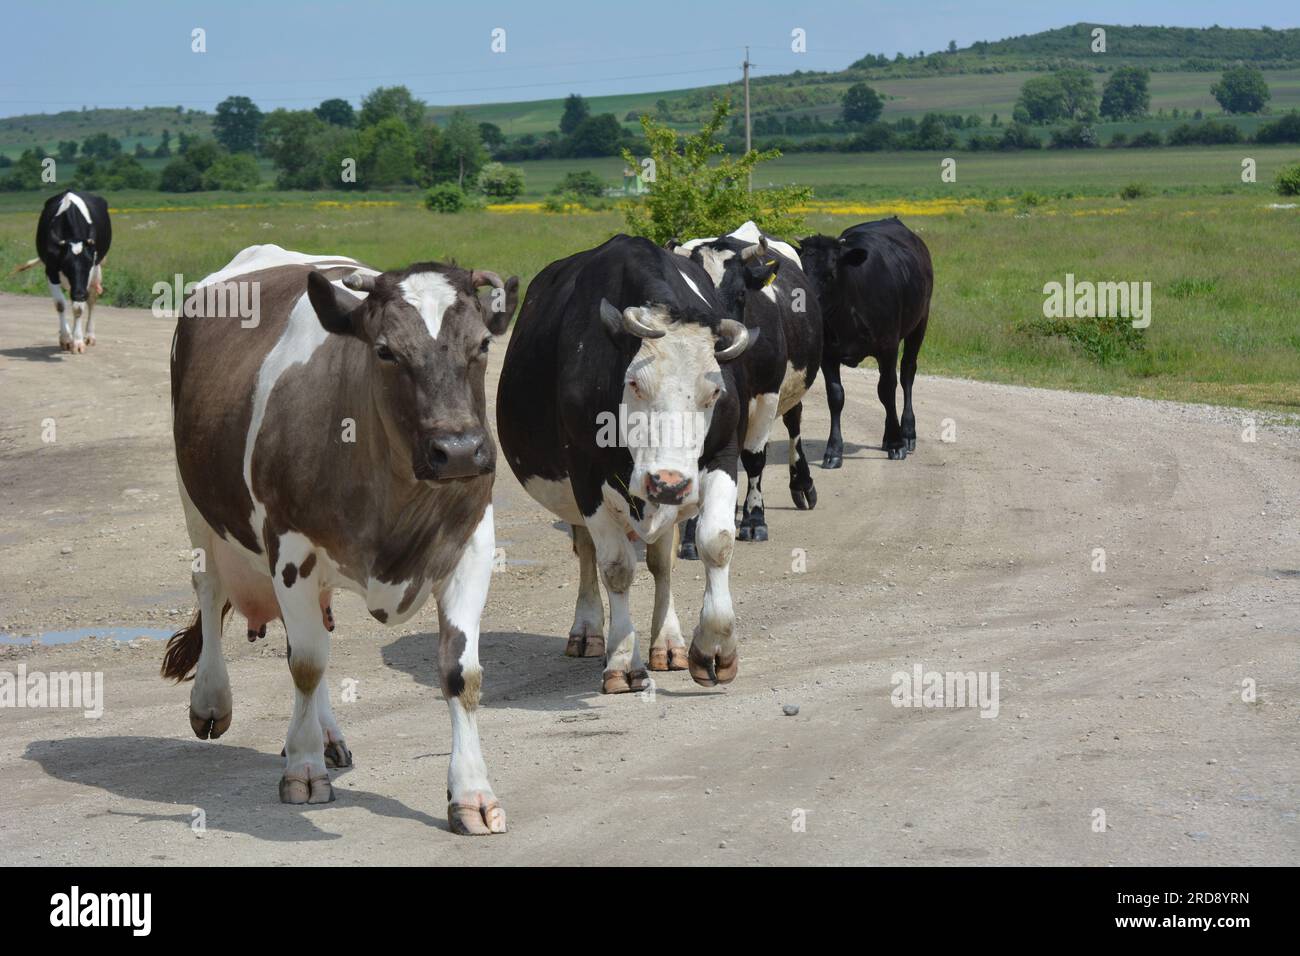 On a village street, cattle from a private farm return home from grazing. Stock Photo